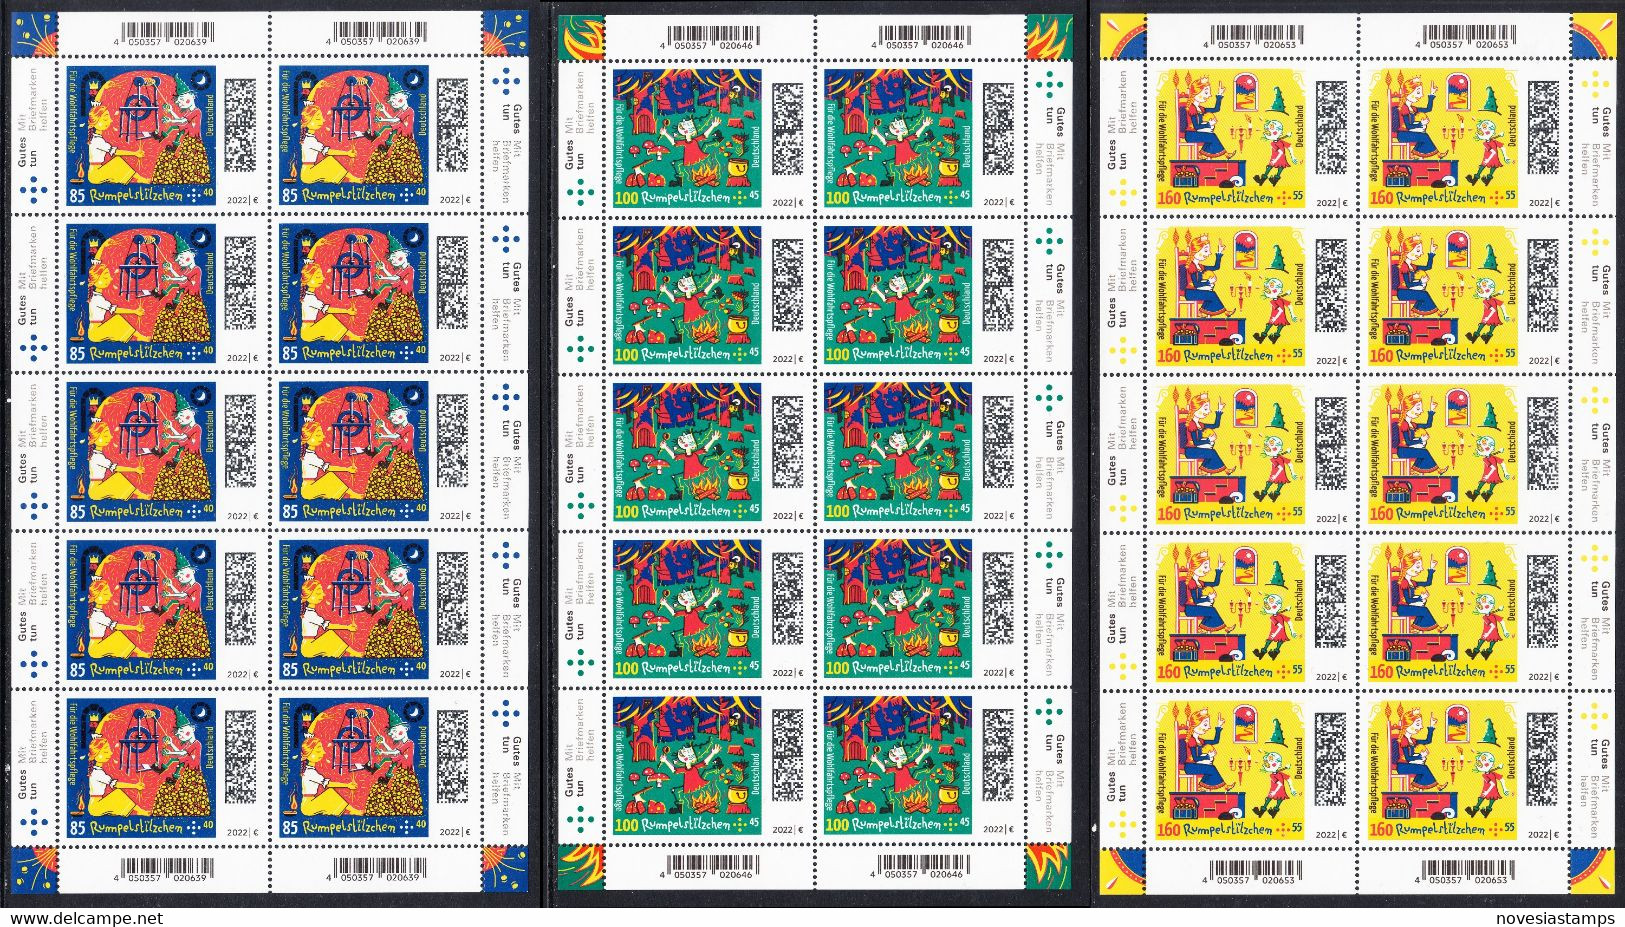 !a! GERMANY 2022 Mi. 3684-3686 MNH SET Of 3 SHEETS (10 Each) - Non-olympic Sports - 2021-…